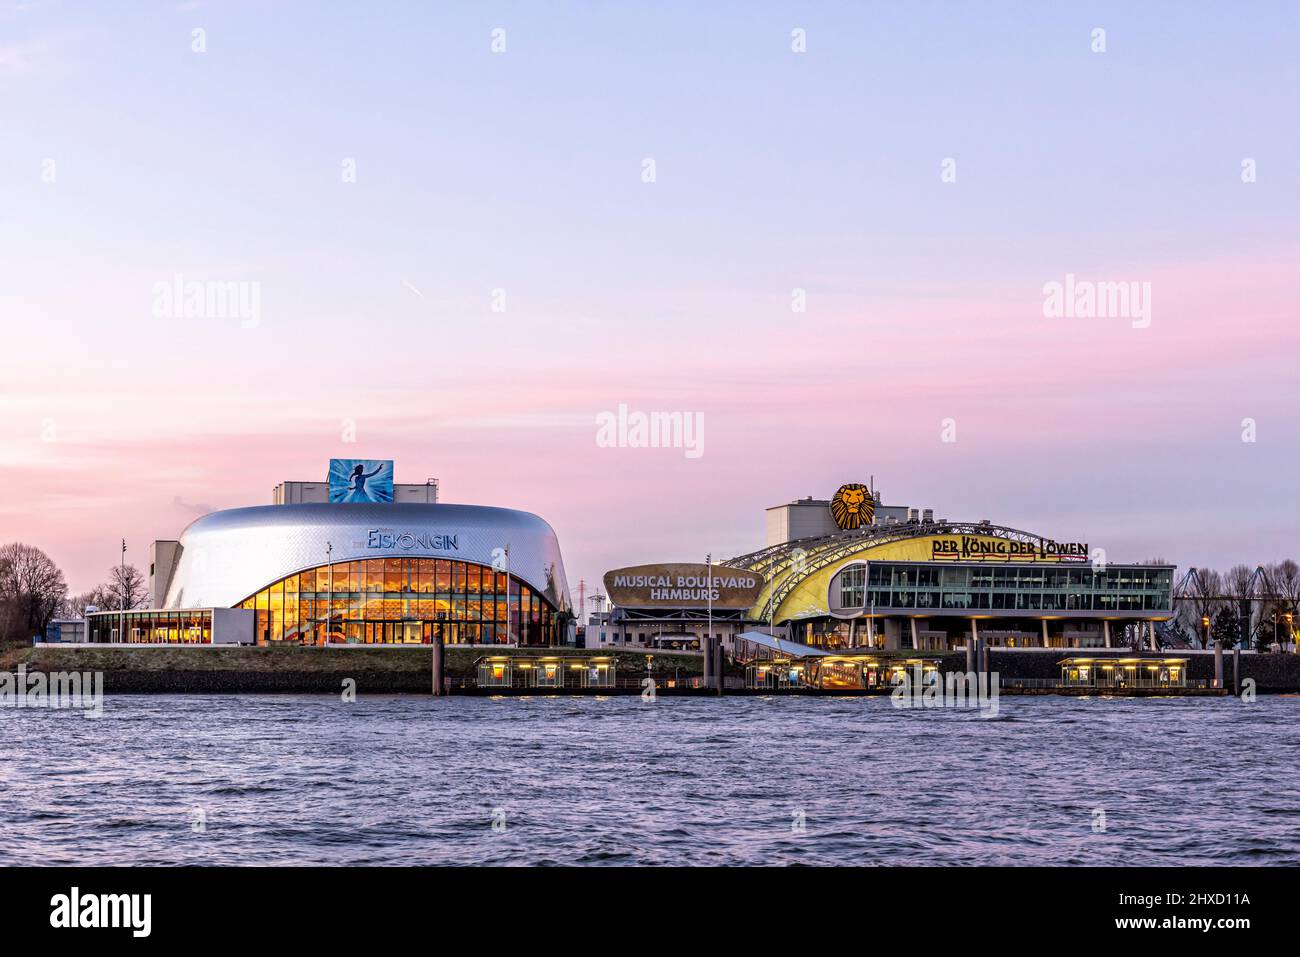 Musical theater in the harbor on the banks of the Elbe, Hamburg, Germany Stock Photo